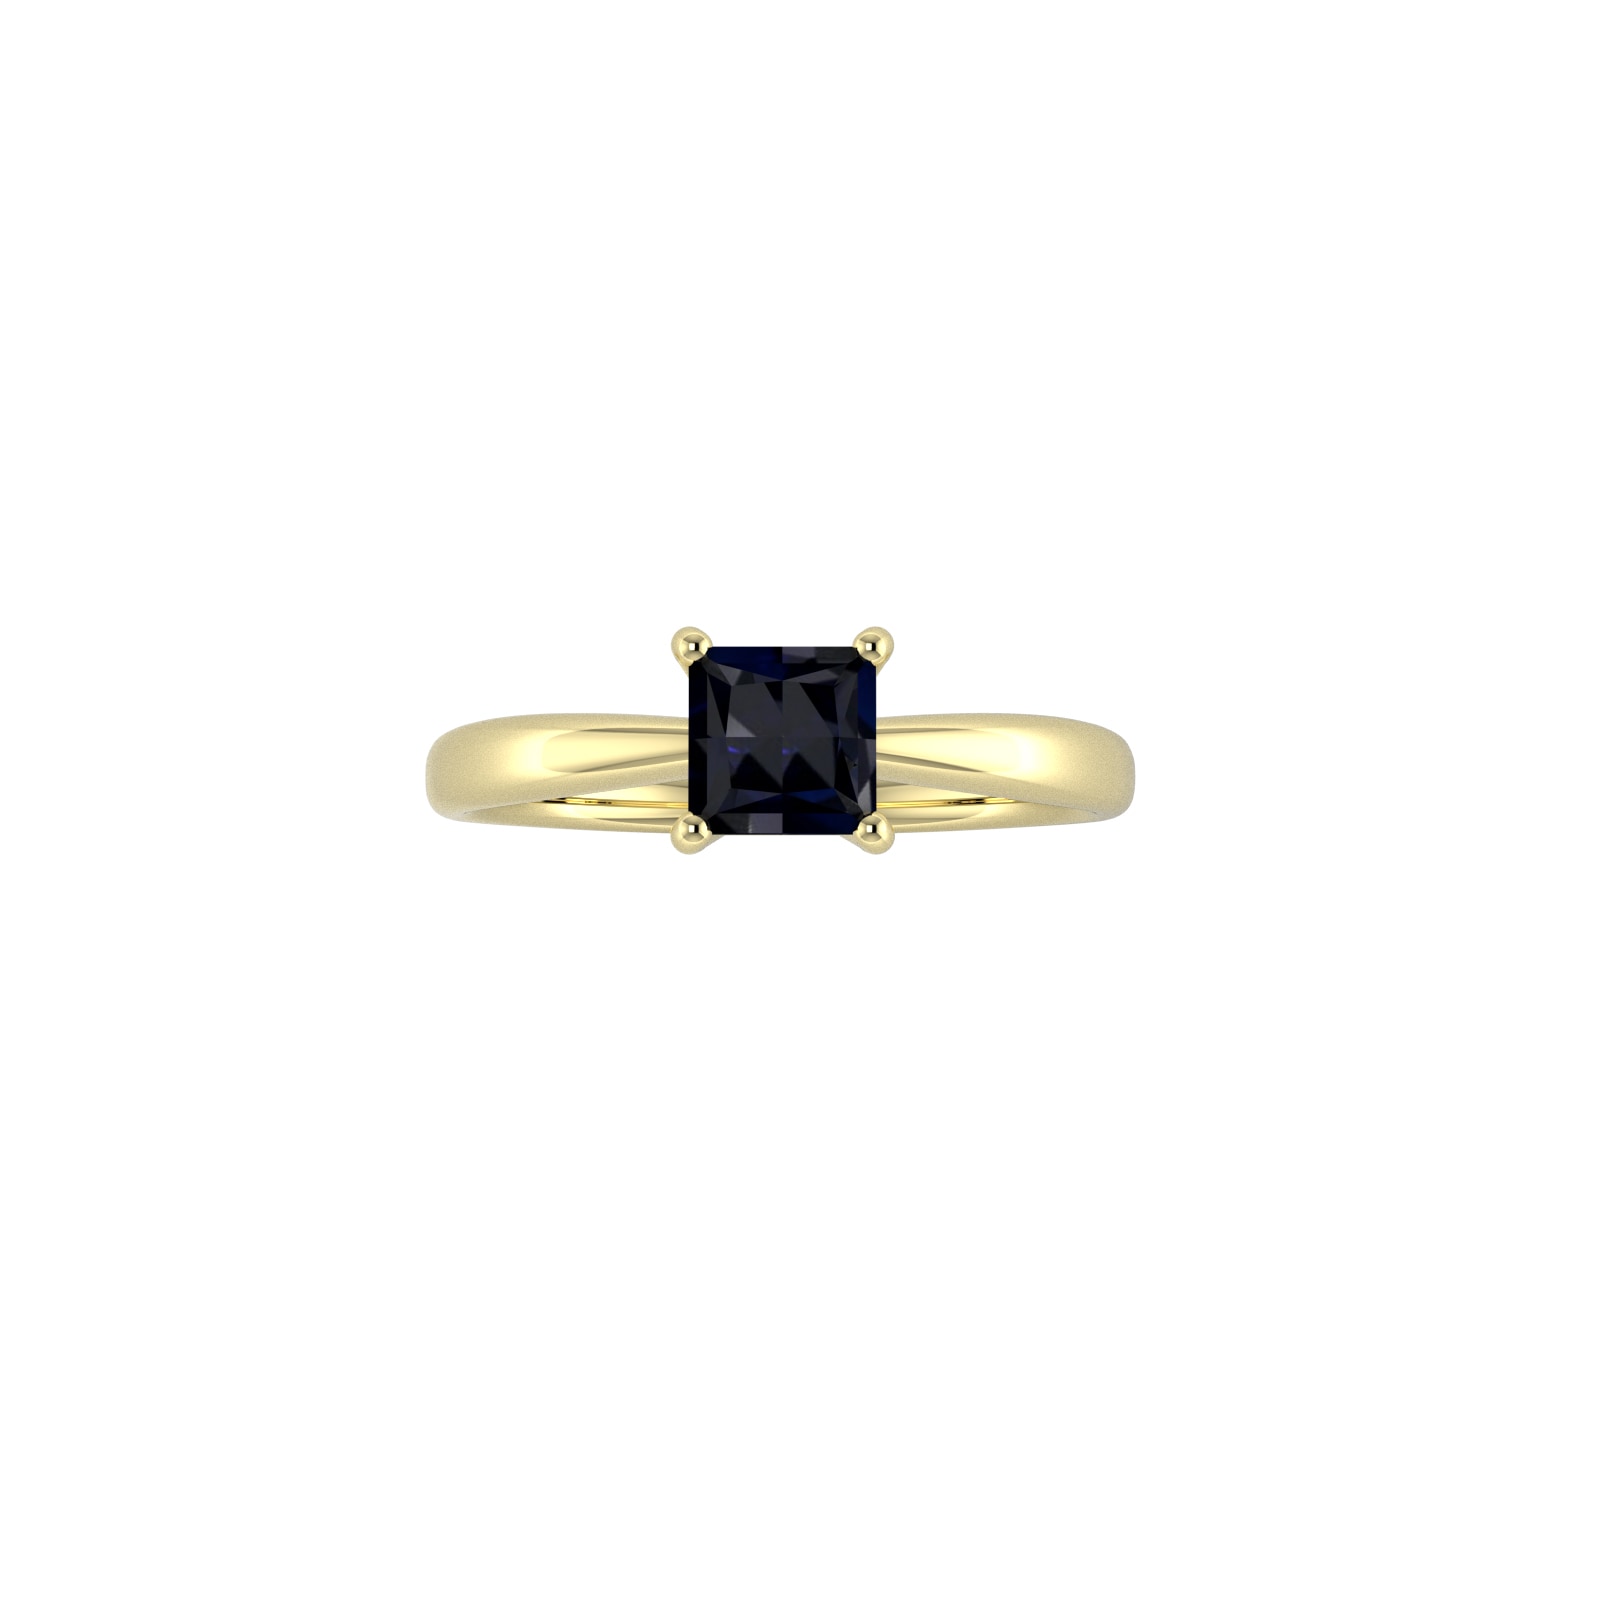 9ct Yellow Gold 4 Claw Square Sapphire 5mm x 5mm Ring- Ring Size G.5